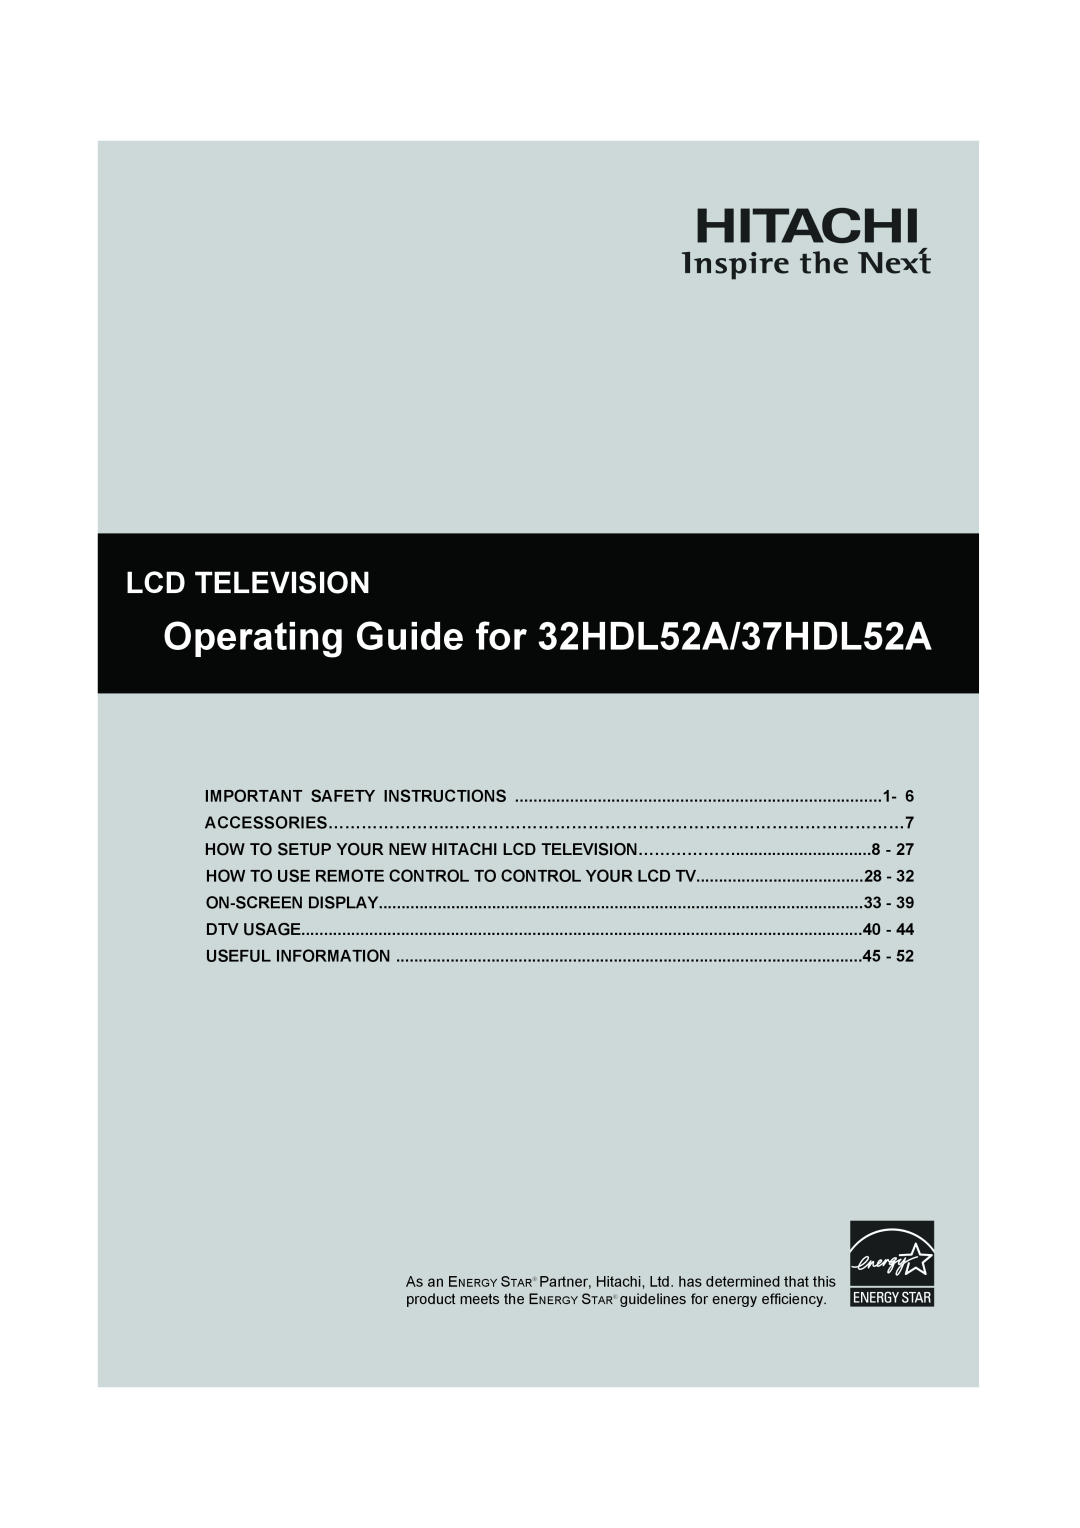 Hitachi important safety instructions Operating Guide for 32HDL52A/37HDL52A, Lcd Television, On-Screen Display 